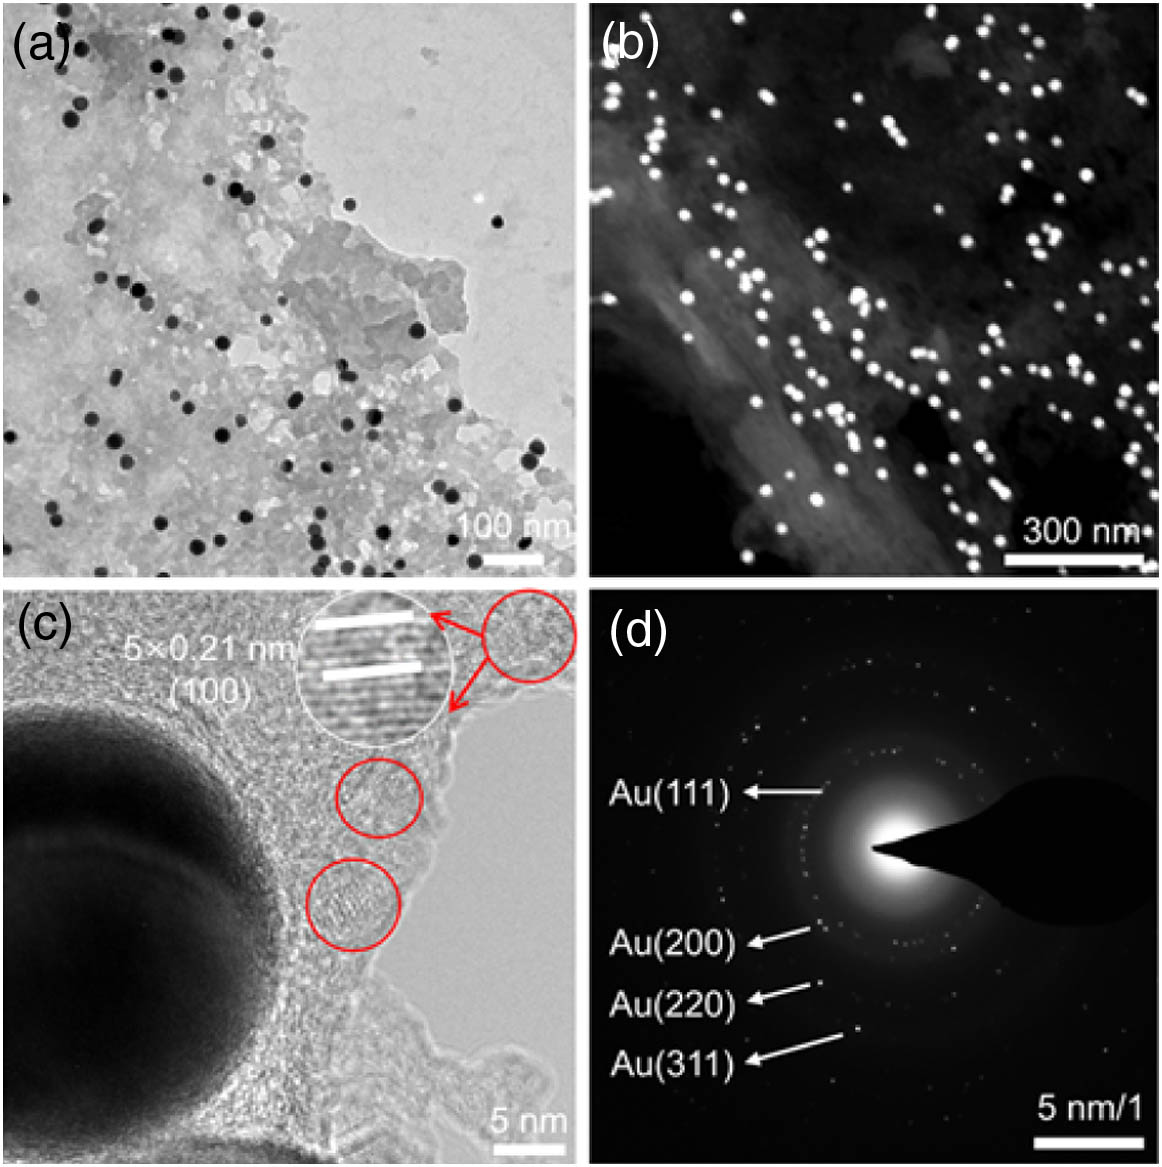 (a) Representative transmission electron microscopy (TEM) and (b) high angle annular dark-field-scanning transmission electron microscopy (HADDF-STEM) images of the AuNP/GQDs. (c) High resolution transmission electron microscopy (HRTEM) image of the AuNP/GQDs; the red circle inside is GQD, inset is a scaled up view of GQD with high resolution, lattice spacing is 0.21 nm, and crystal plane is (100). (d) Selected area electron diffraction (SAED) pattern of AuNP/GQDs.